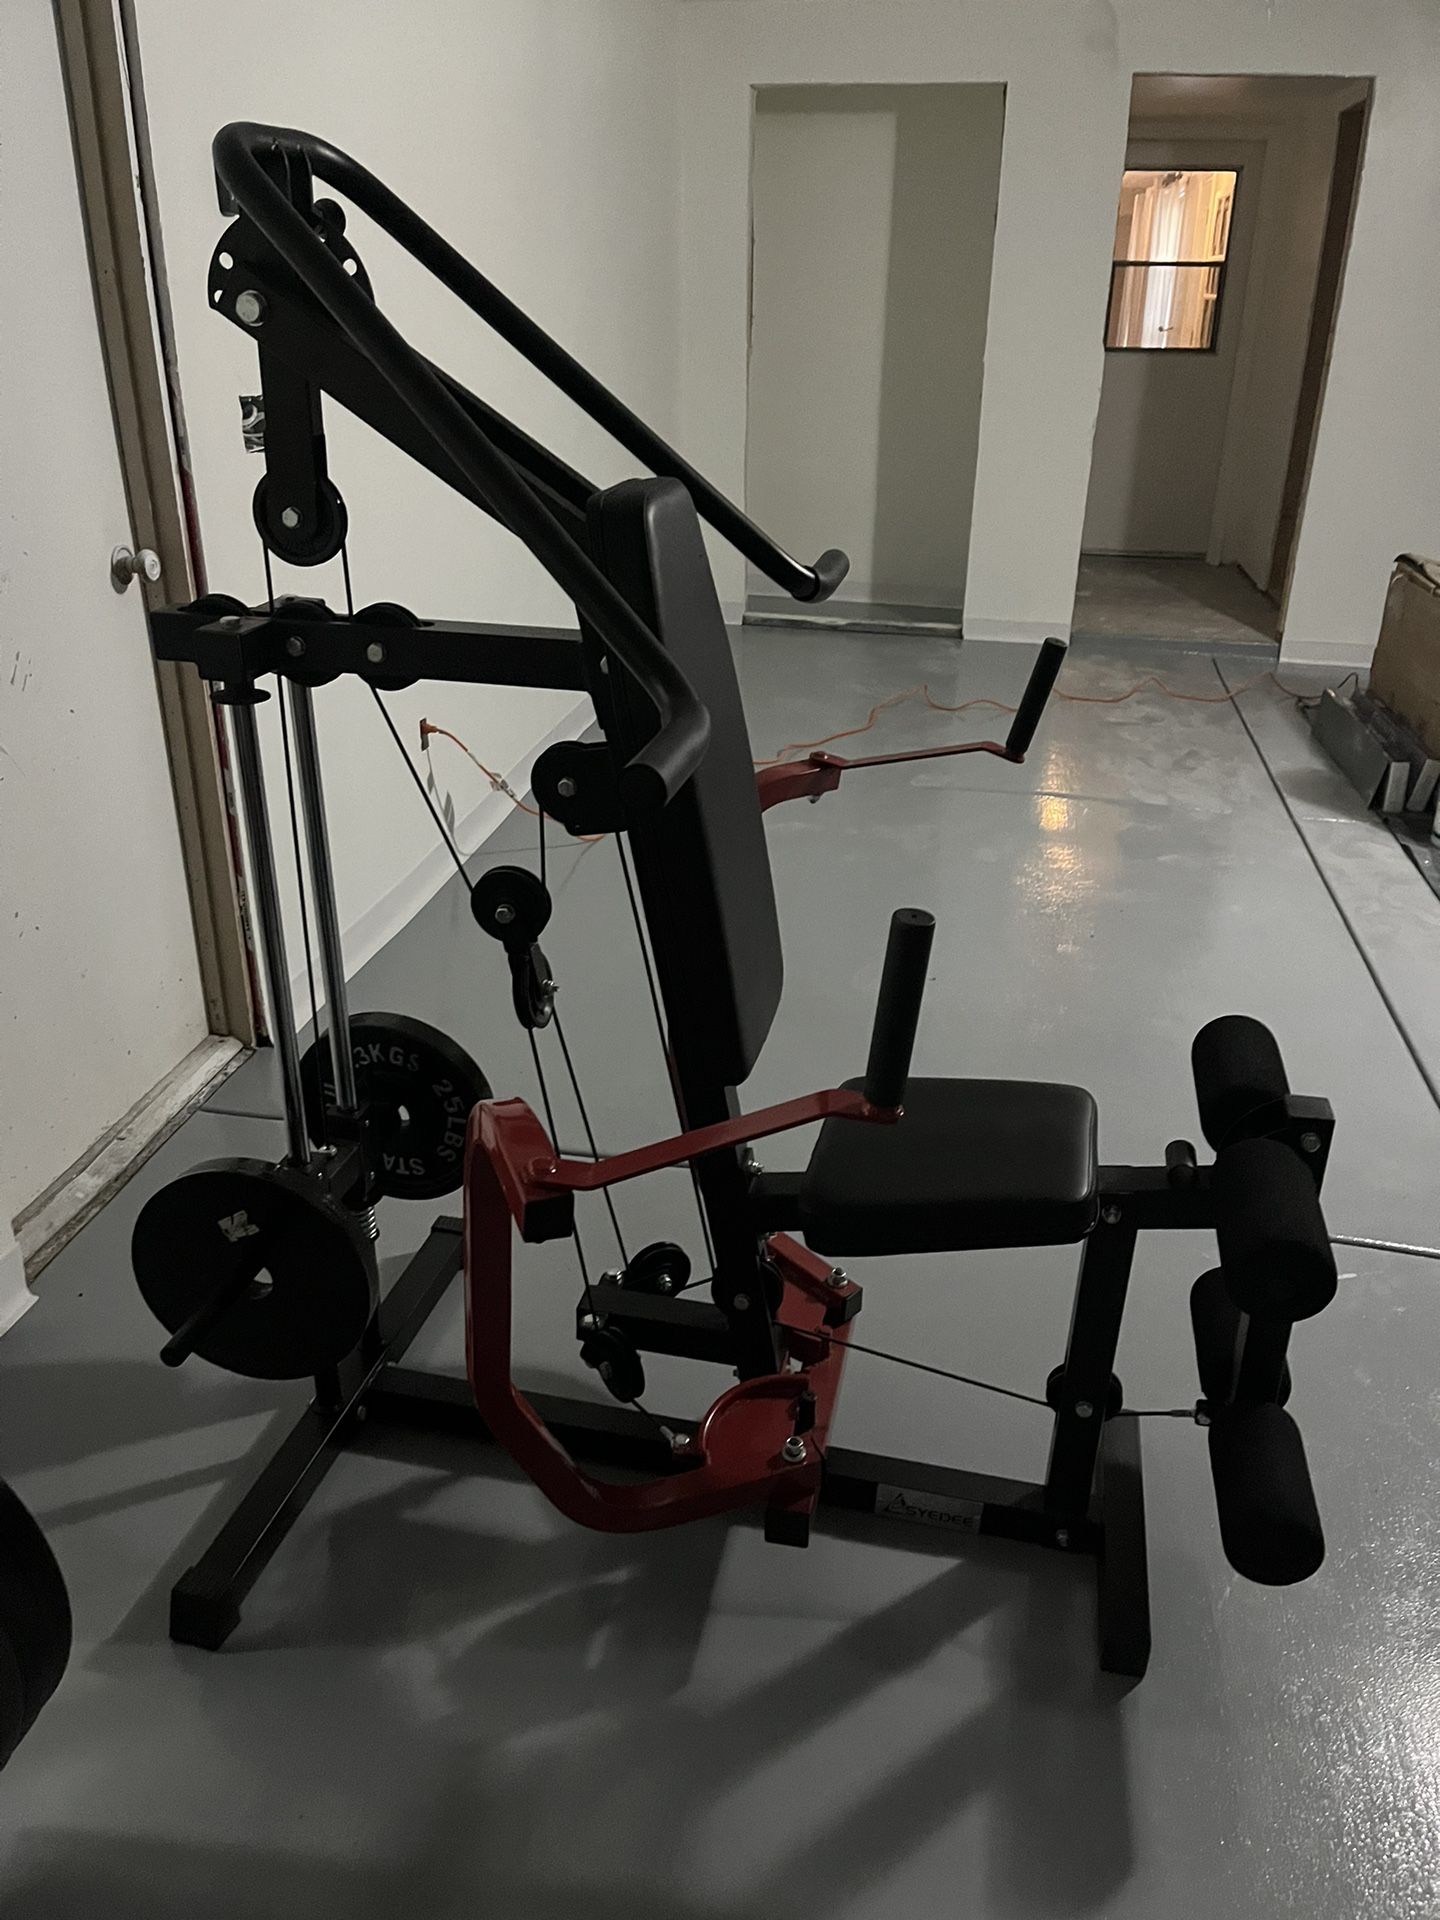 syedee Home Gym Station, 800lb Capacity Leg Extension Machine, Chest Fly and Reverse Delt Machine, Shoulder Press and LAT Pulldown Weight Machine